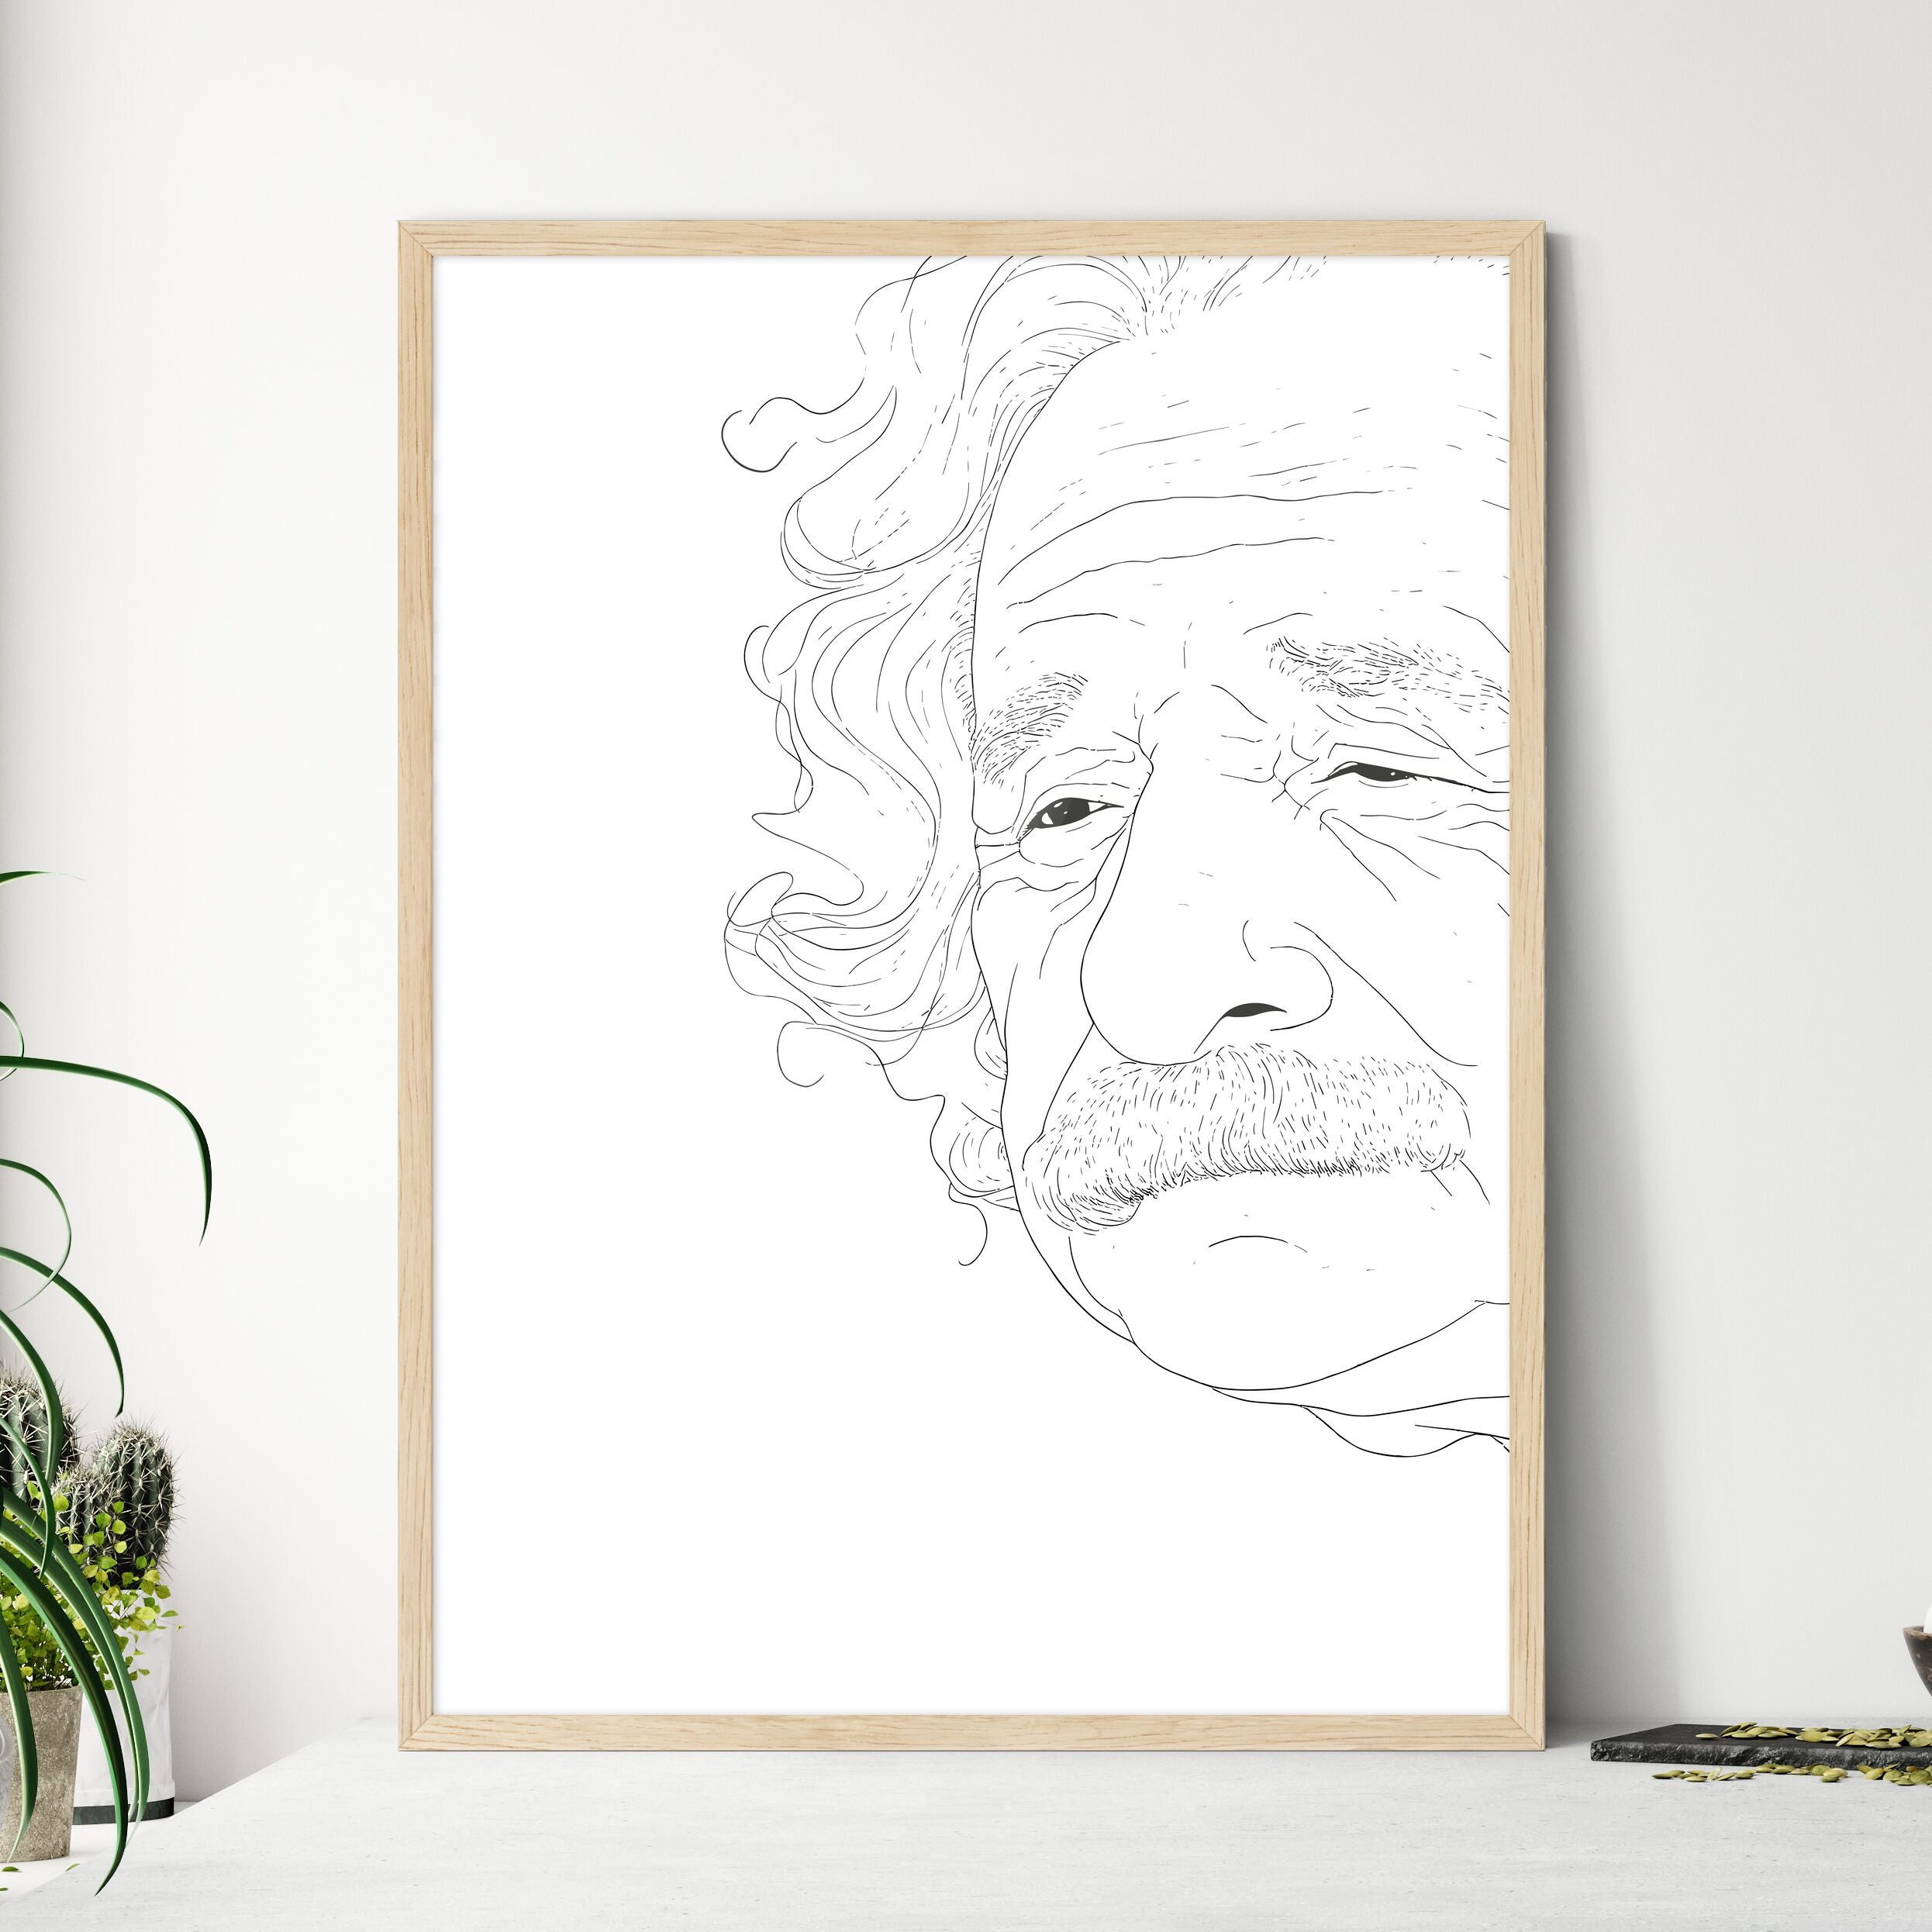 Albert Einstein by gregchapin | Portrait drawing, Drawing sketches,  Celebrity drawings